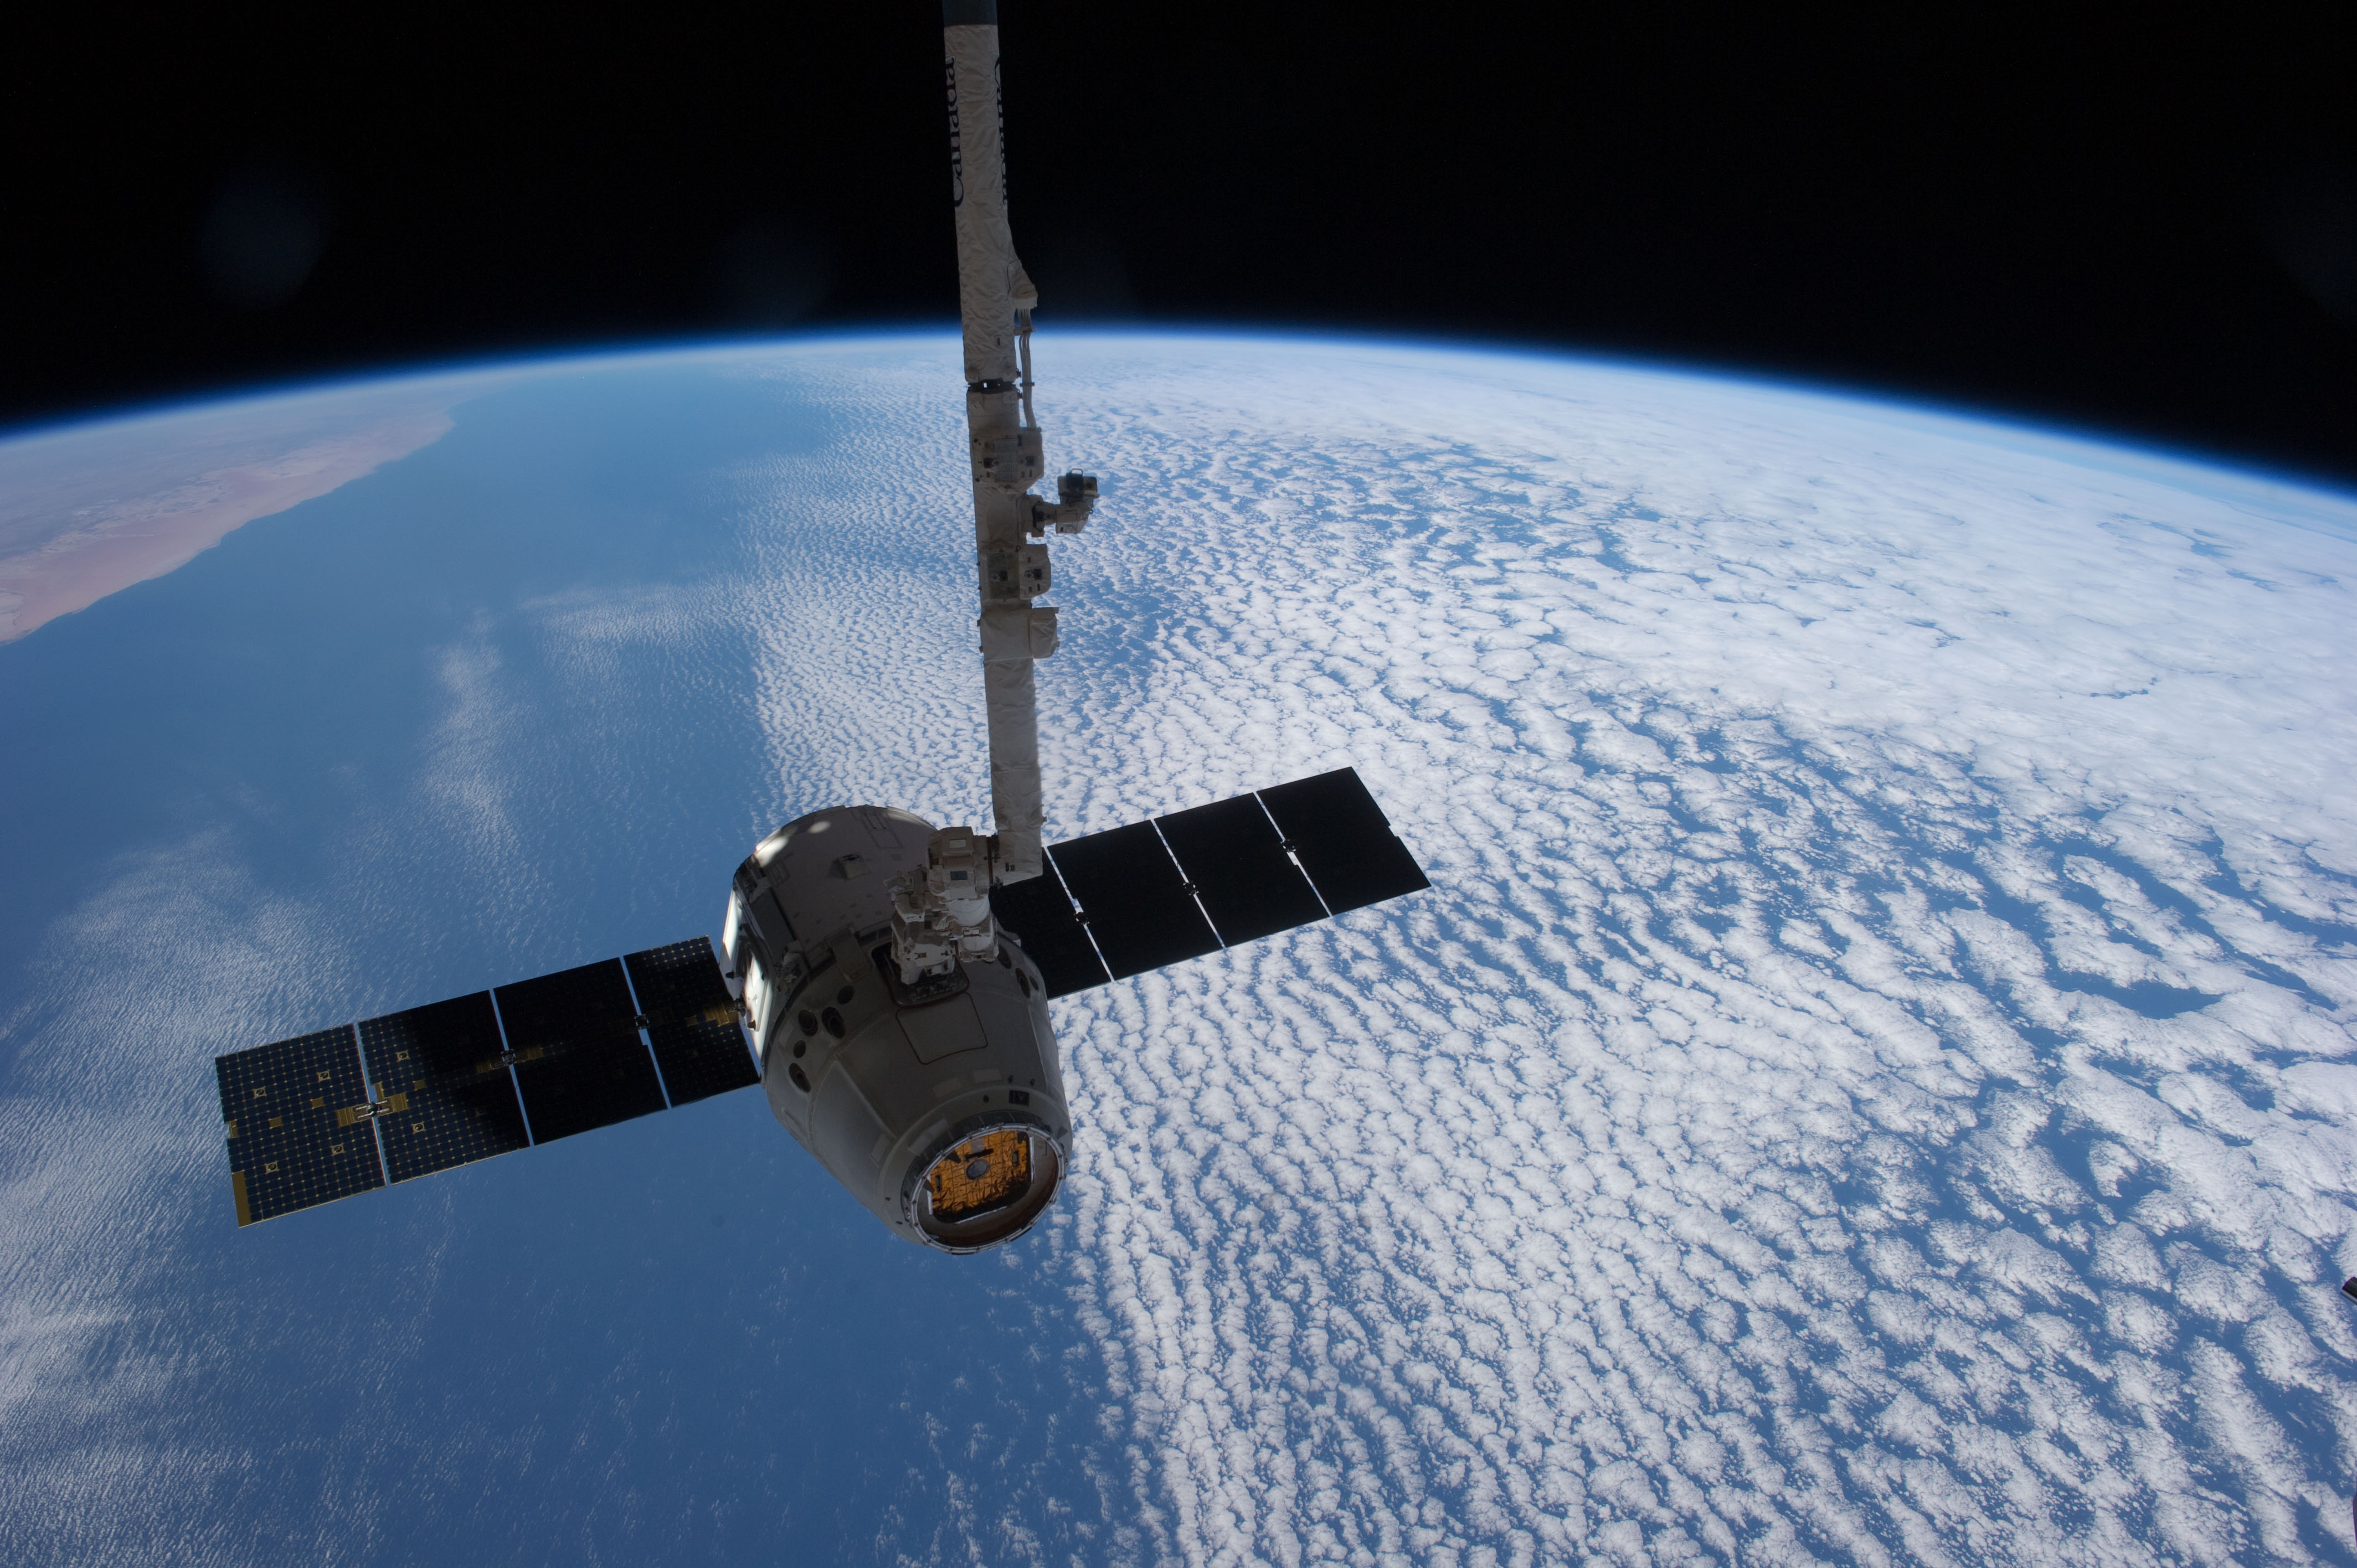 With two dedicated Commercial Resupply Services (CRS) missions under its belt, SpaceX is set for several key flights in support of science during 2014. Photo Credit: NASA